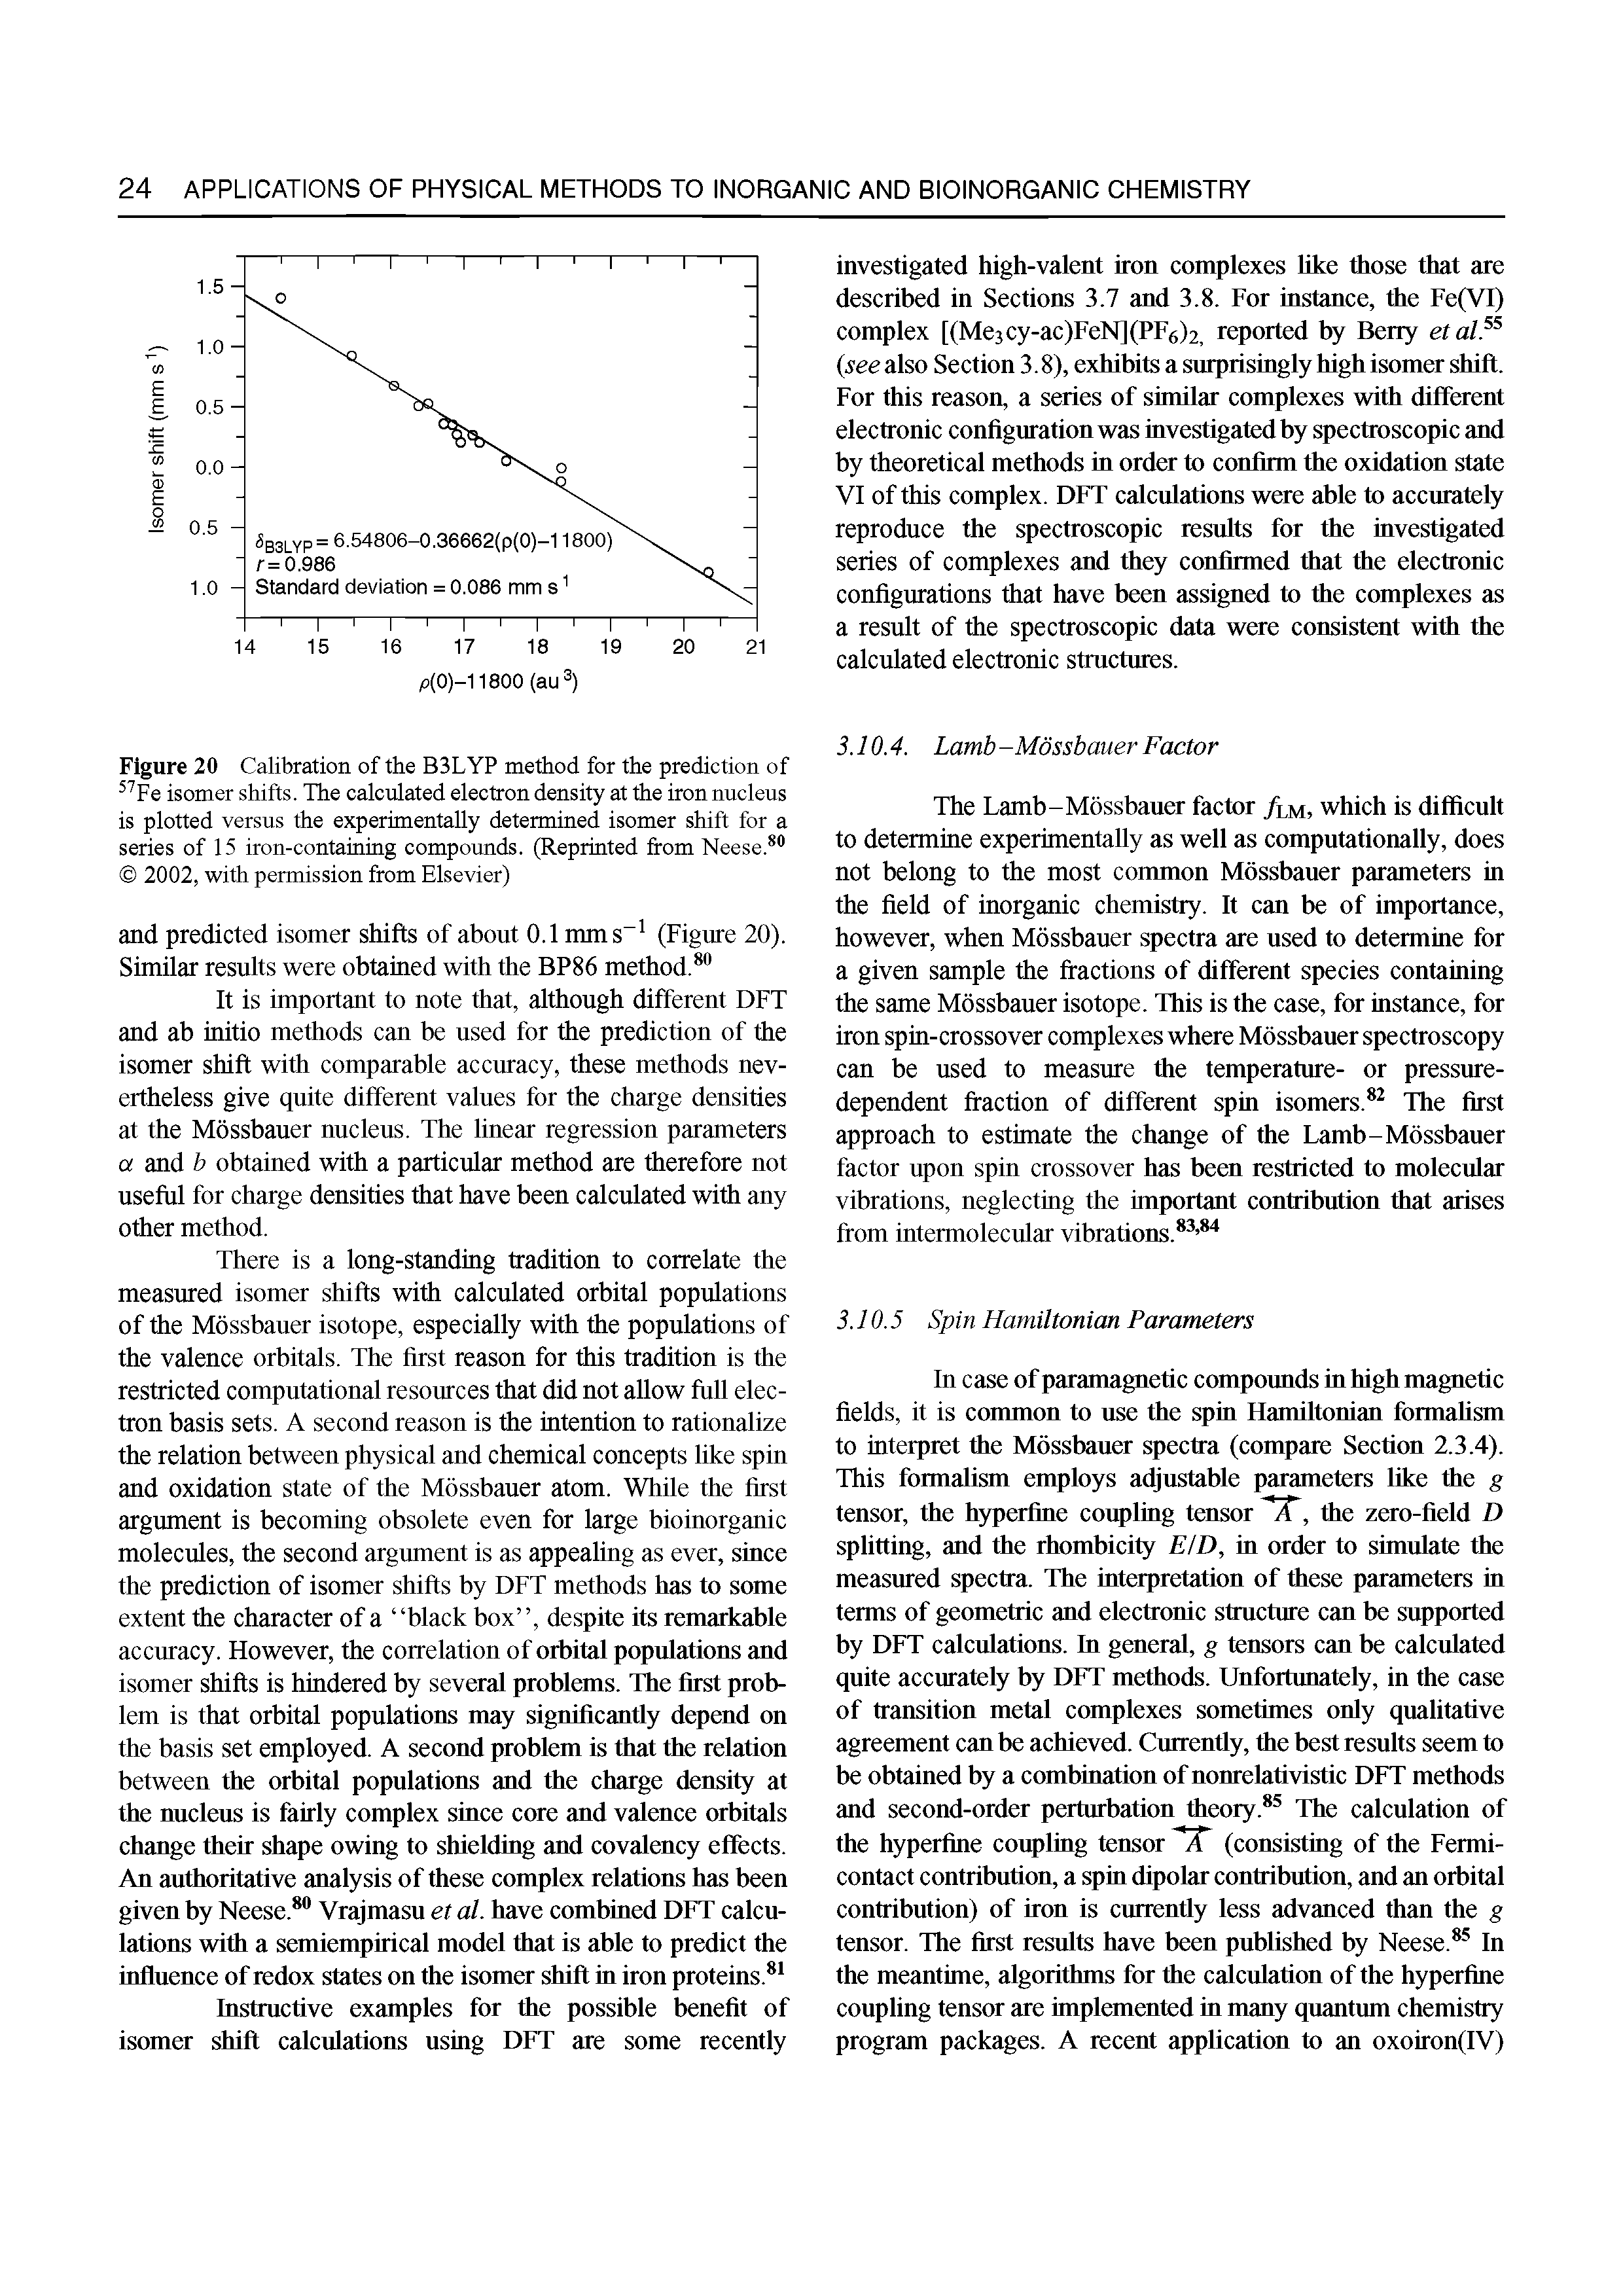 Figure 20 Calibration of the B3LYP method for the prediction of Fe isomer shifts. The calculated electron density at the iron nucleus is plotted versus the experimentally determined isomer shift for a series of 15 iron-containing compounds. (Reprinted from Neese. 2002, with permission from Elsevier)...